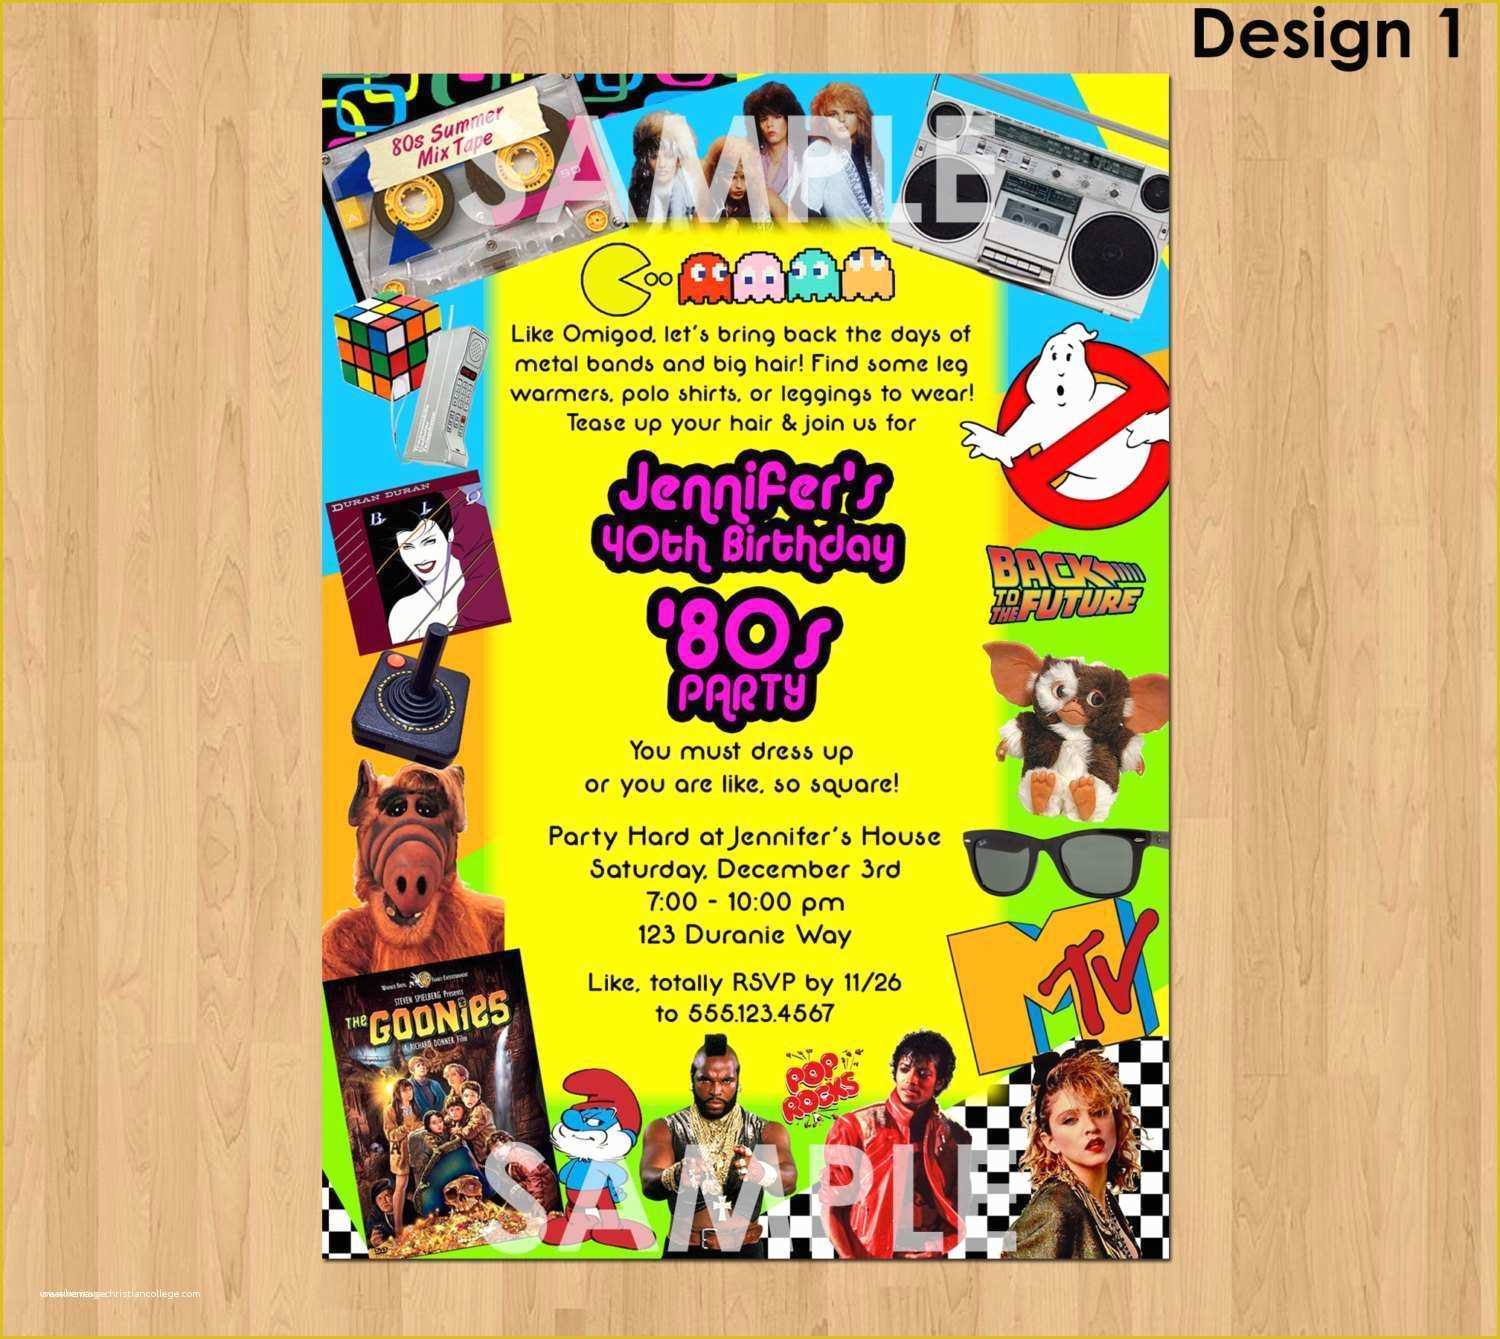 80s Party Invitations Template Free Of 40th Birthday Party Invitations for Him Elegant 80s Party